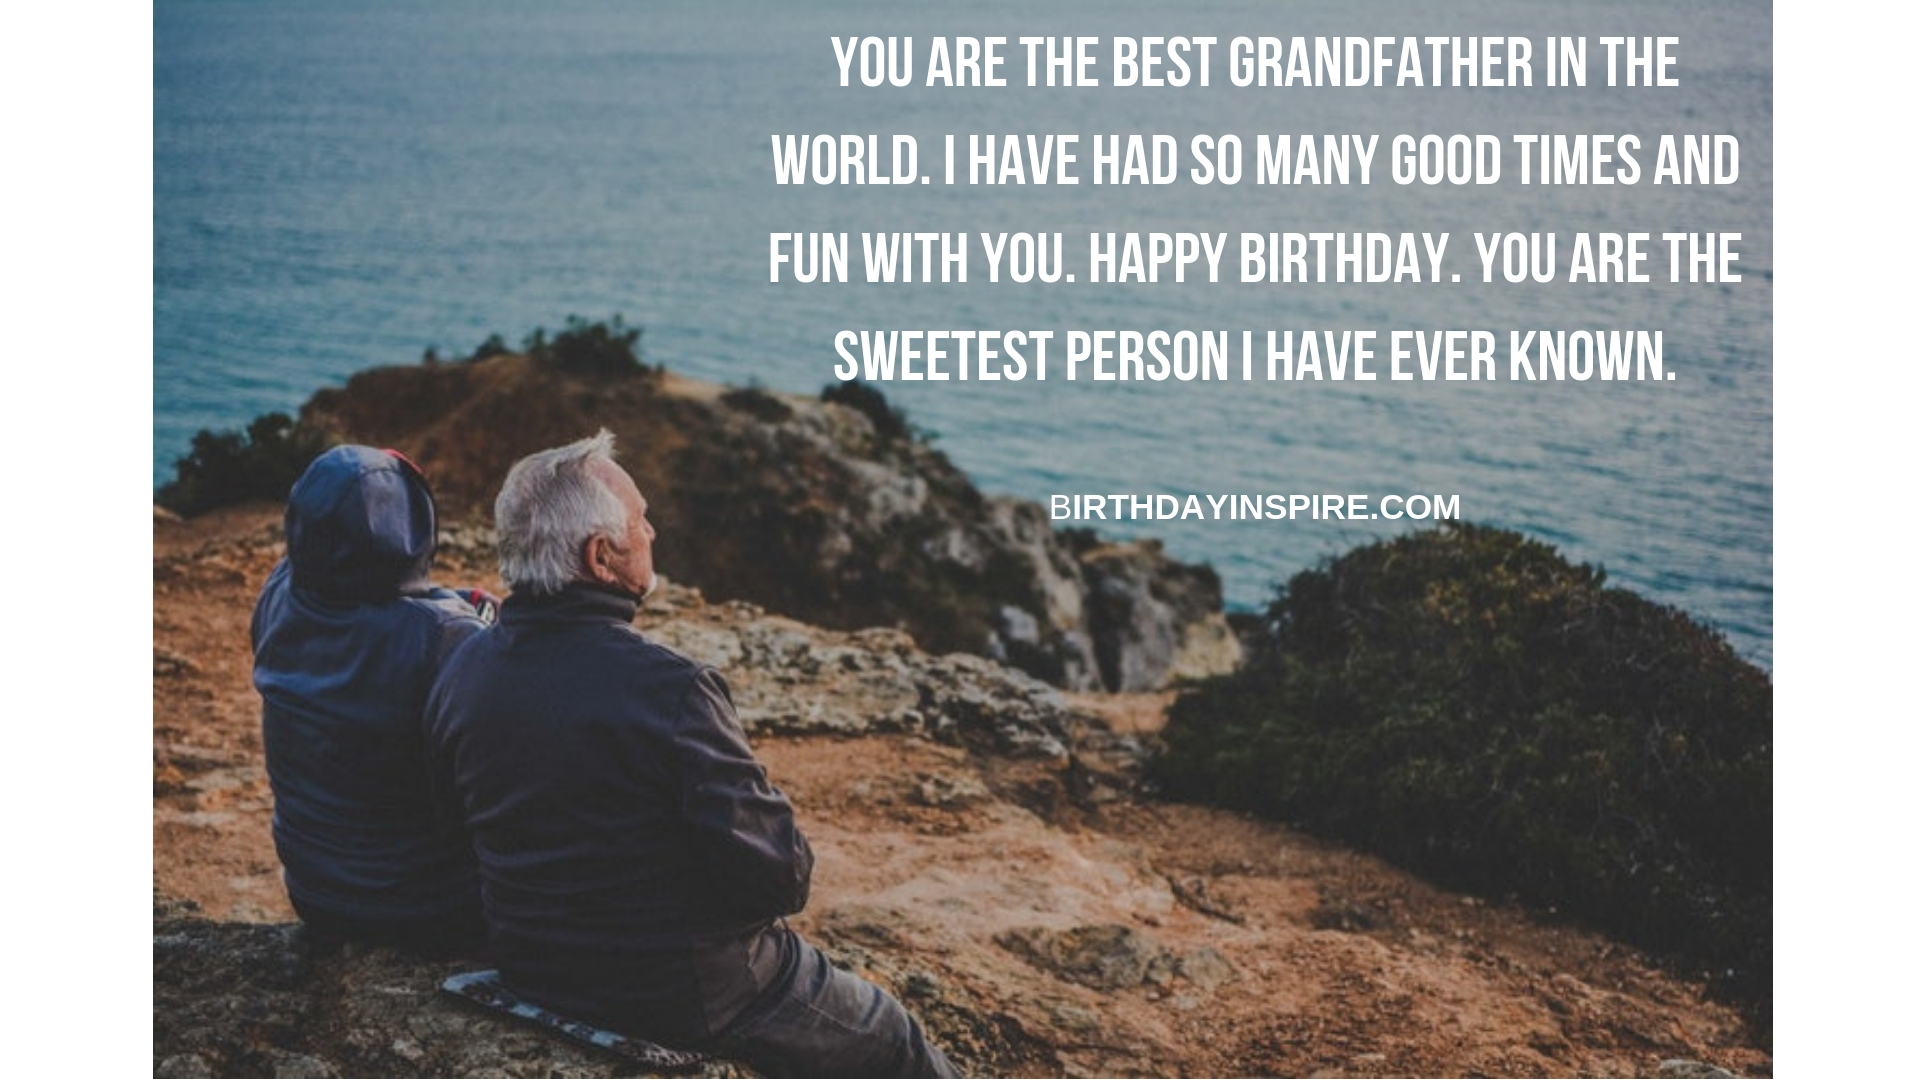 BIRTHDAY WISHES FOR GRANDFATHER 